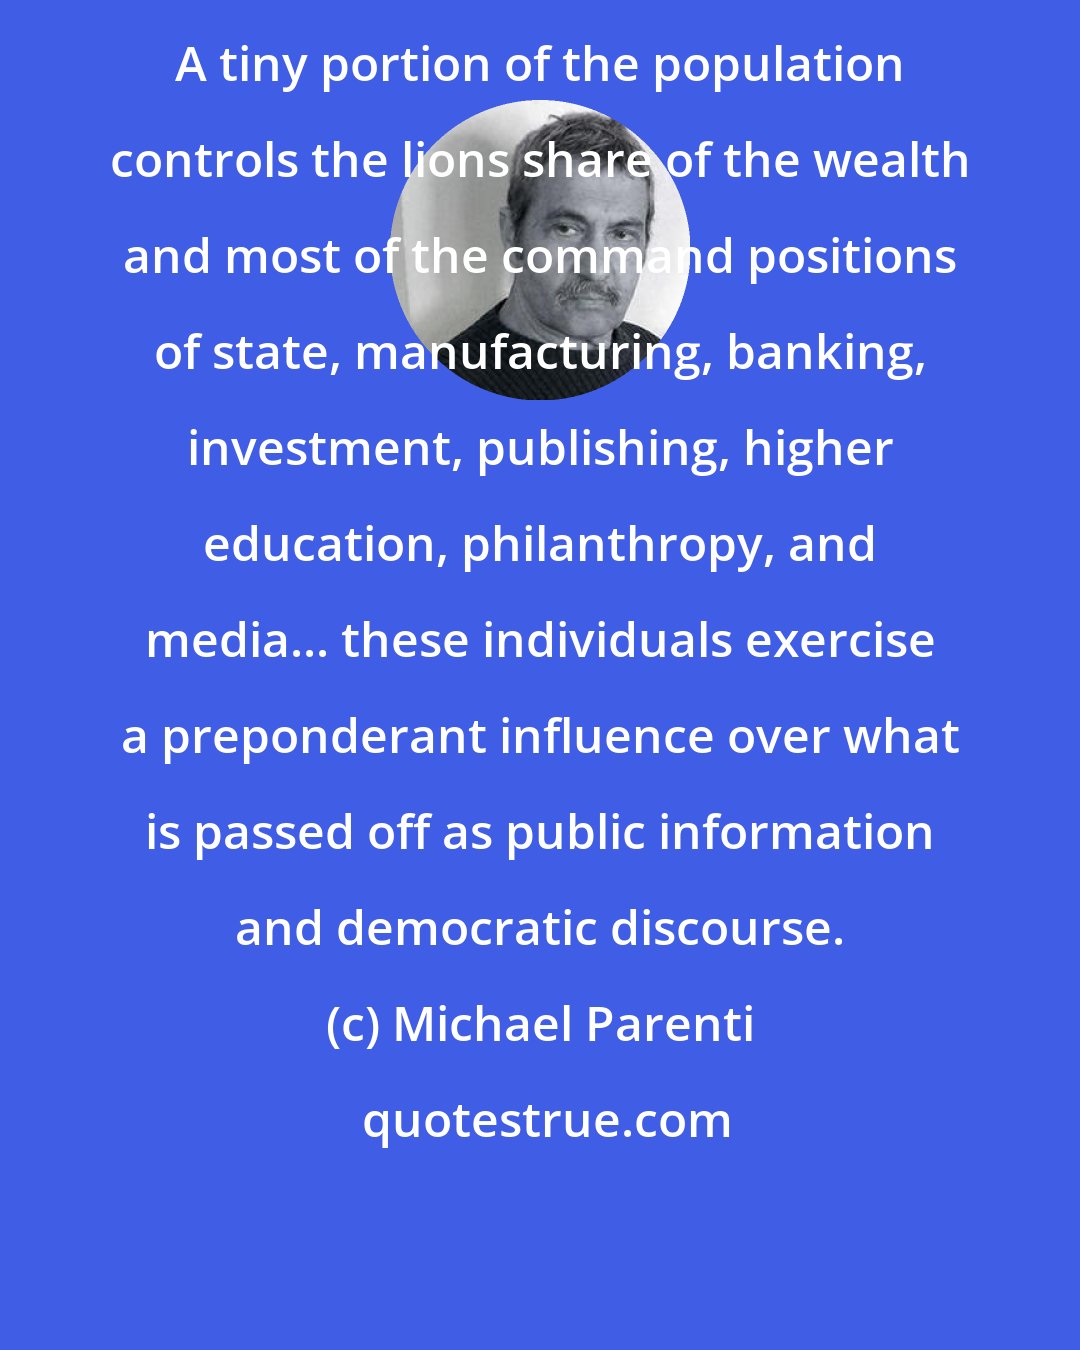 Michael Parenti: A tiny portion of the population controls the lions share of the wealth and most of the command positions of state, manufacturing, banking, investment, publishing, higher education, philanthropy, and media... these individuals exercise a preponderant influence over what is passed off as public information and democratic discourse.